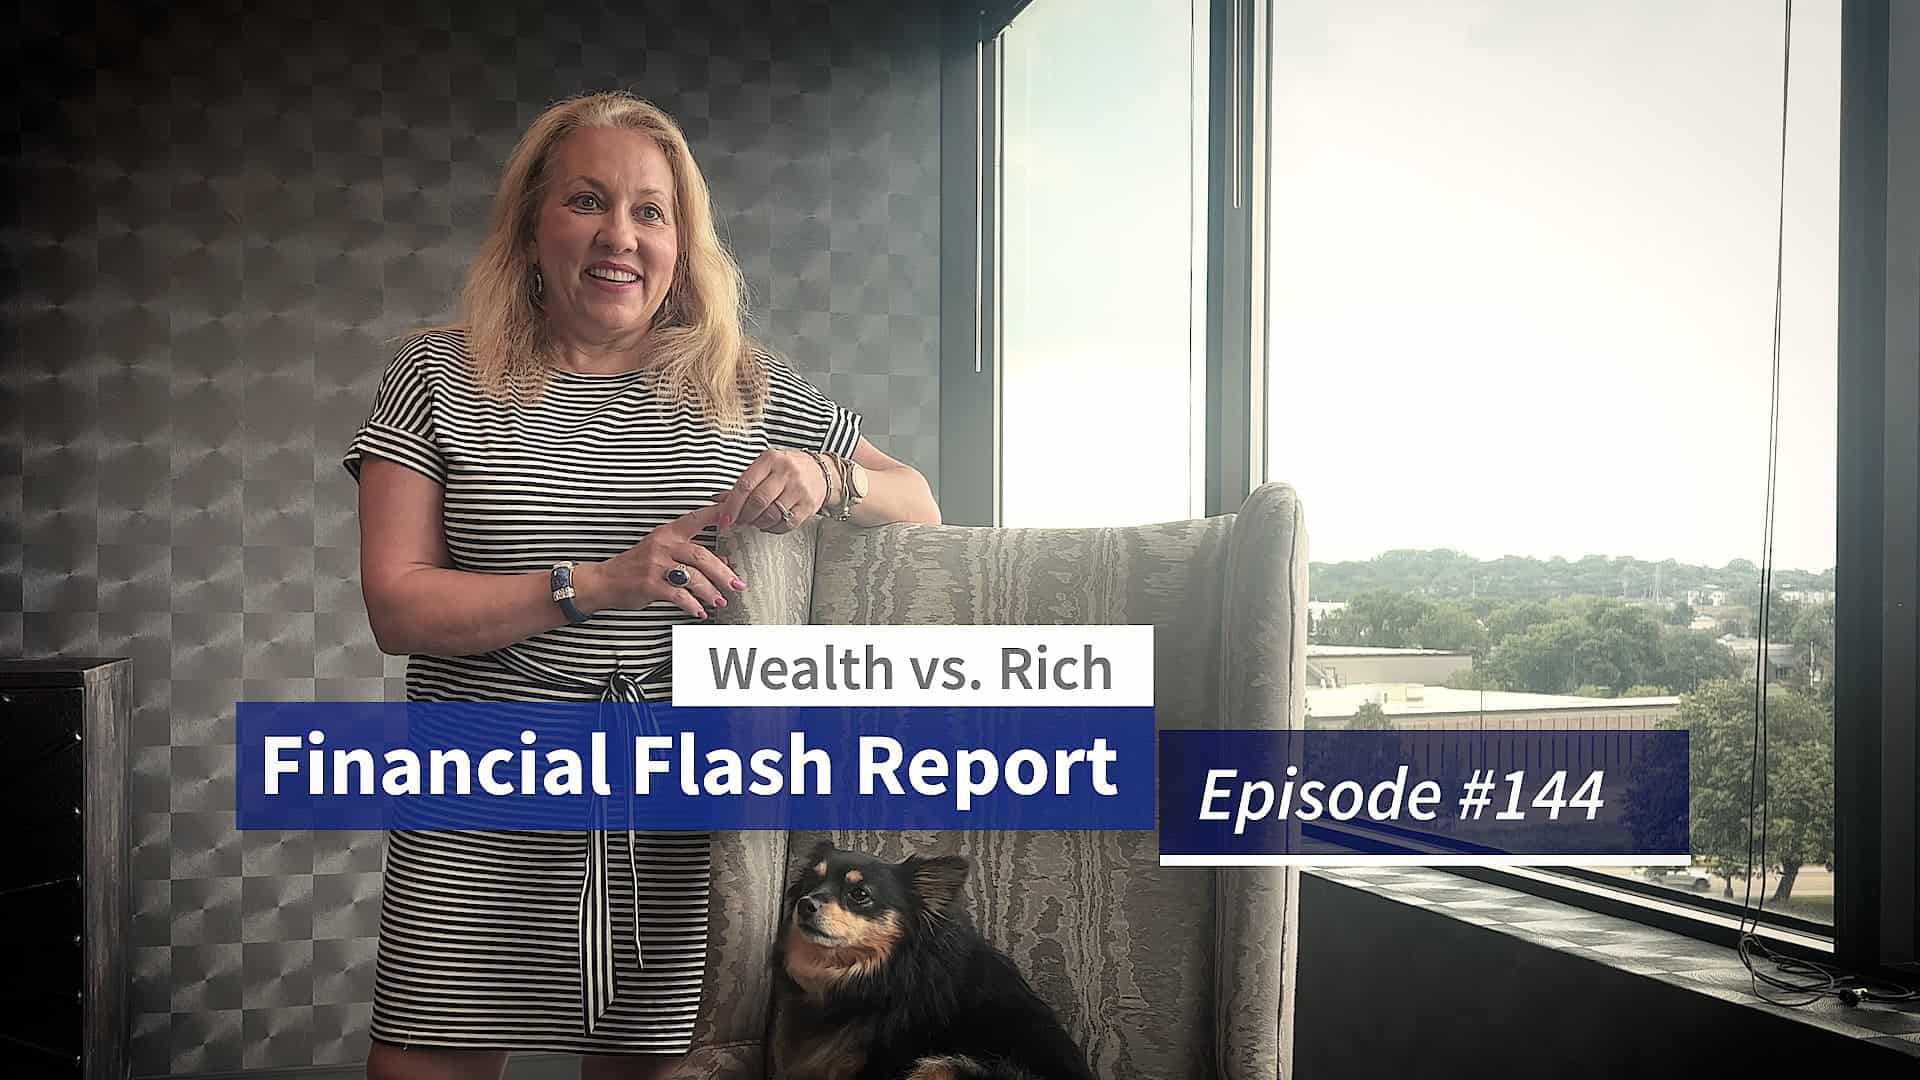 Susan takes us through the differences between Wealthy vs Rich and what it takes to accumulate wealth for your retirement years.